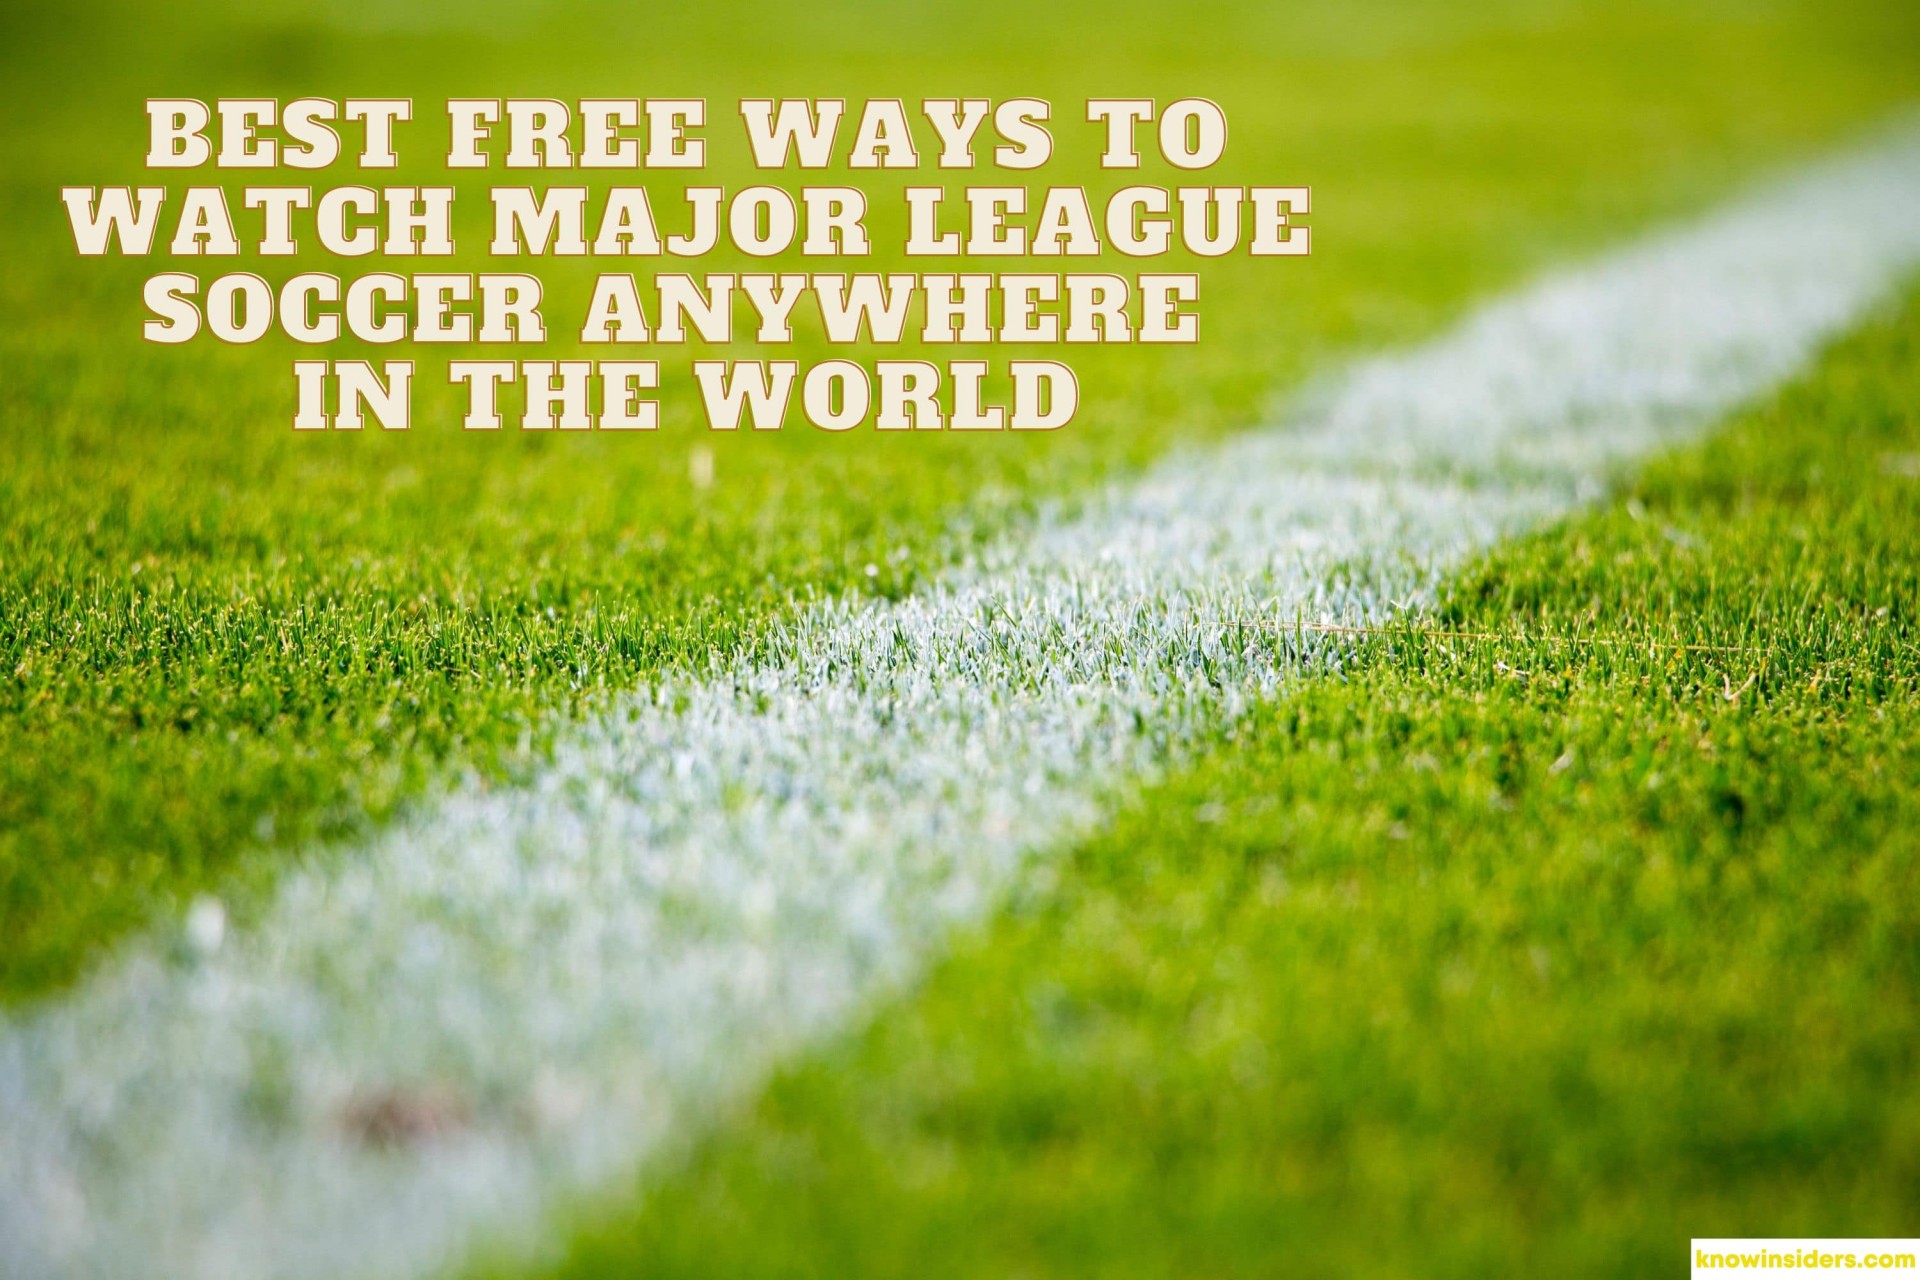 Best Free Ways To Watch Major League Soccer (MLS) Anywhere